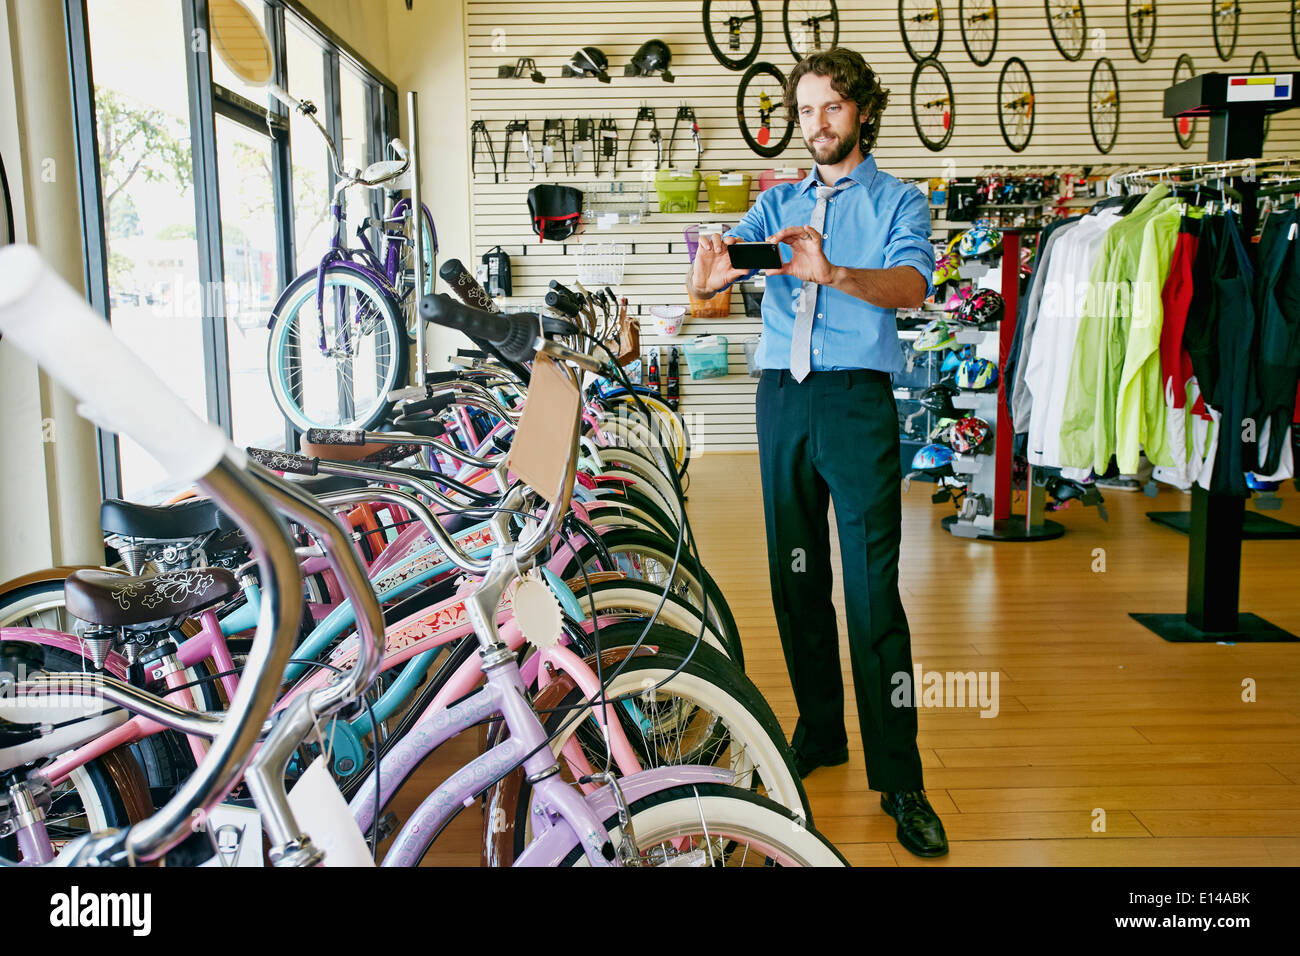 Caucasian businessman taking pictures in bicycle shop Stock Photo